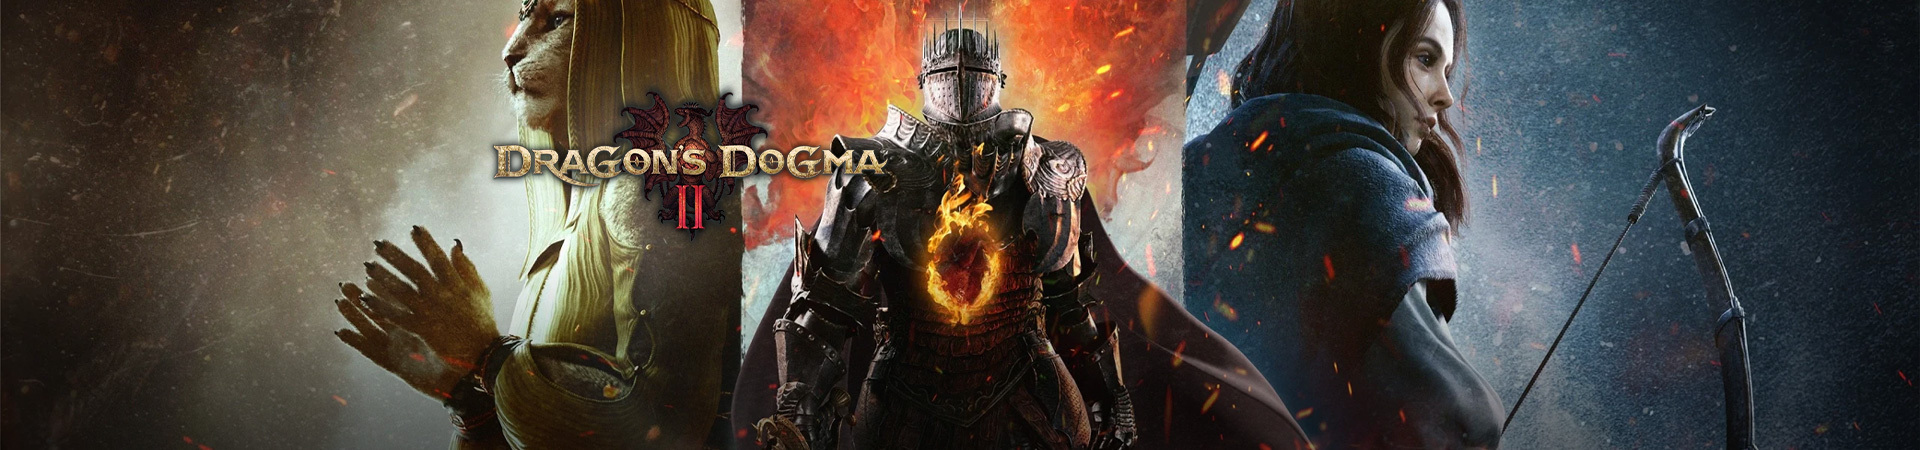 Dragon's Dogma 2 - <b><img class="img-dk "  src="/images/icon-serialfor-steam.png" width="" height="" title="Buyers receive a key for Steam to redeem, install &amp; play" /><img class="img-lt "  src="/images/icon-serialfor-steam-lt.png" width="" height="" title="Buyers receive a key for Steam to redeem, install &amp; play" /></b><span> Now available</span>